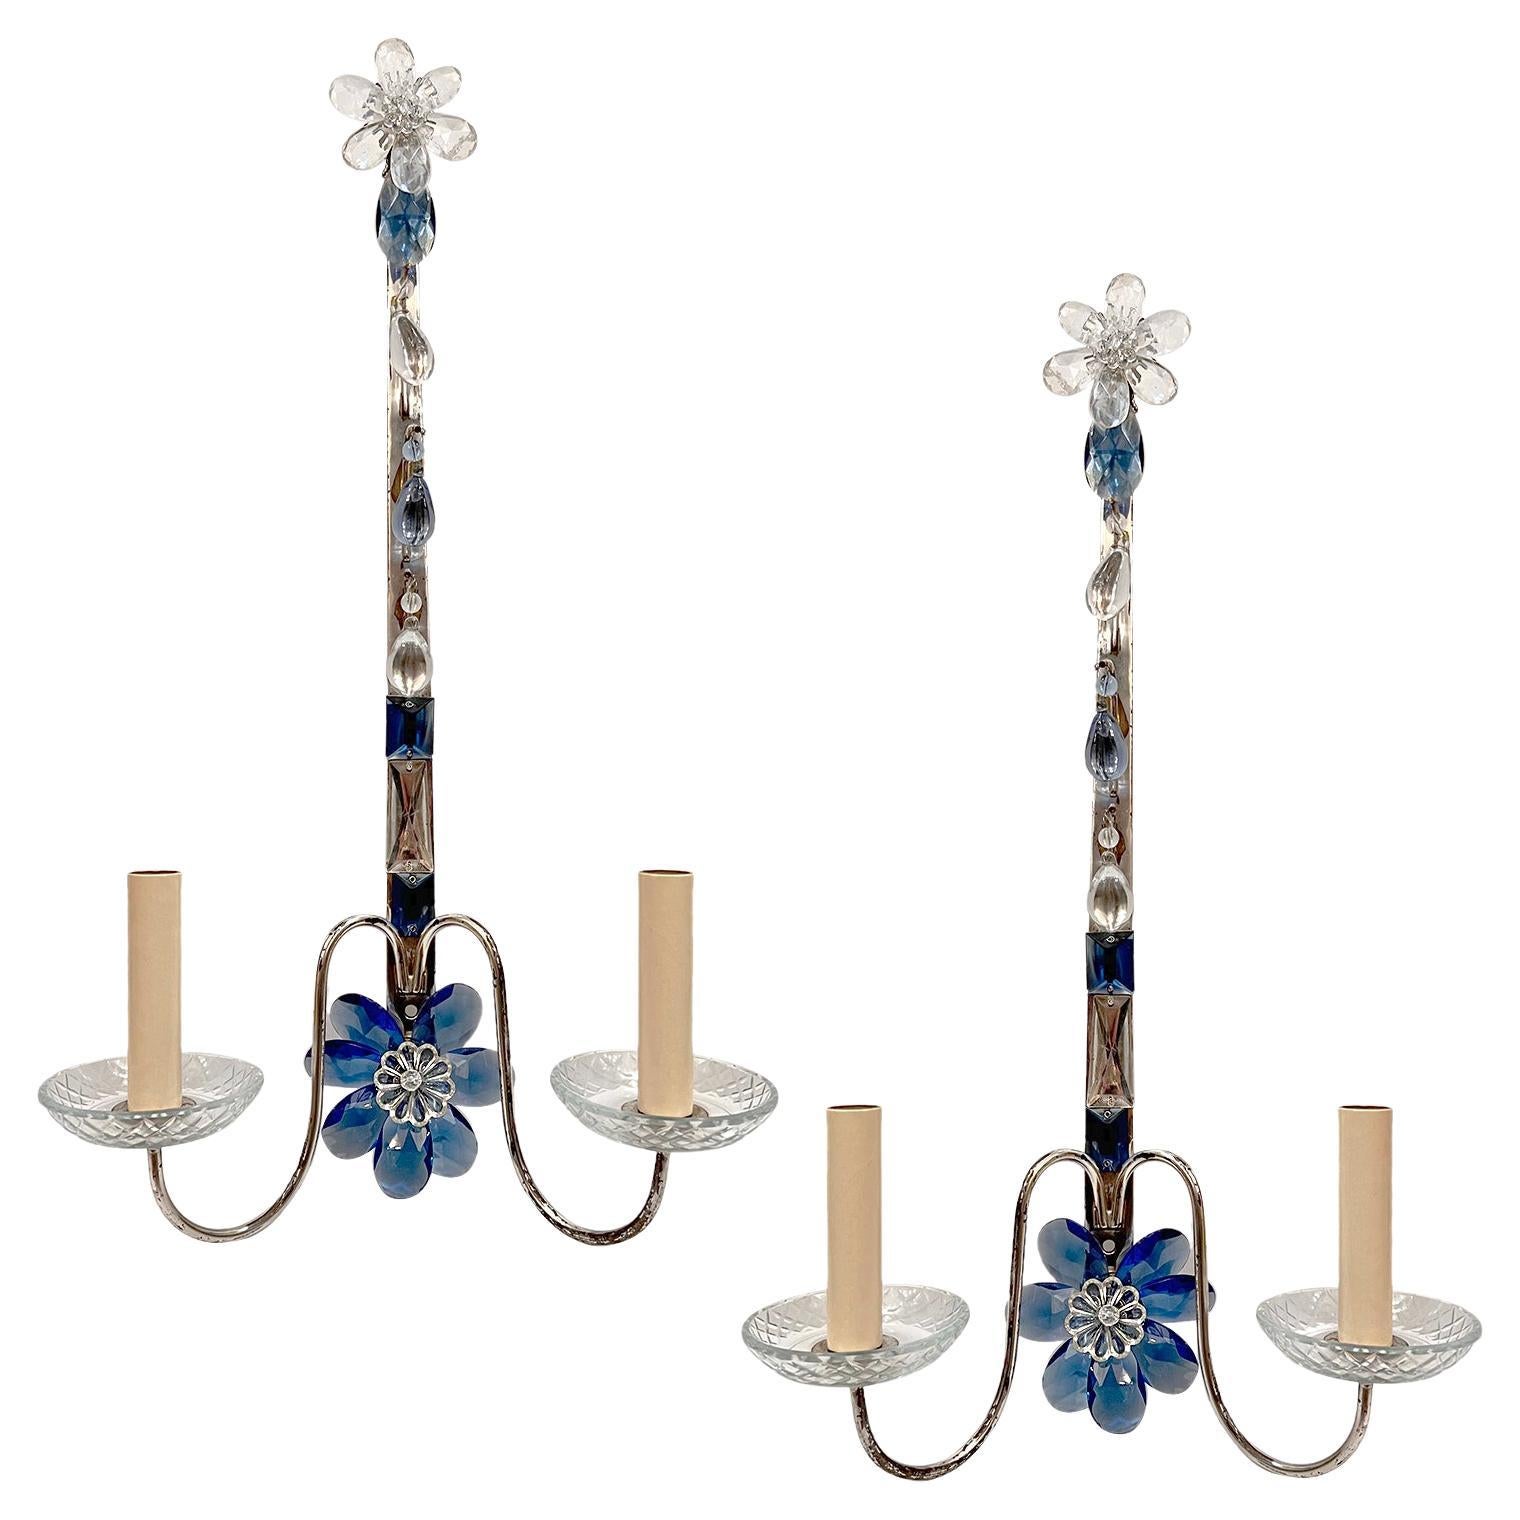 Set of Silver Plated Sconces With Blue Crystals, Sold per Pair